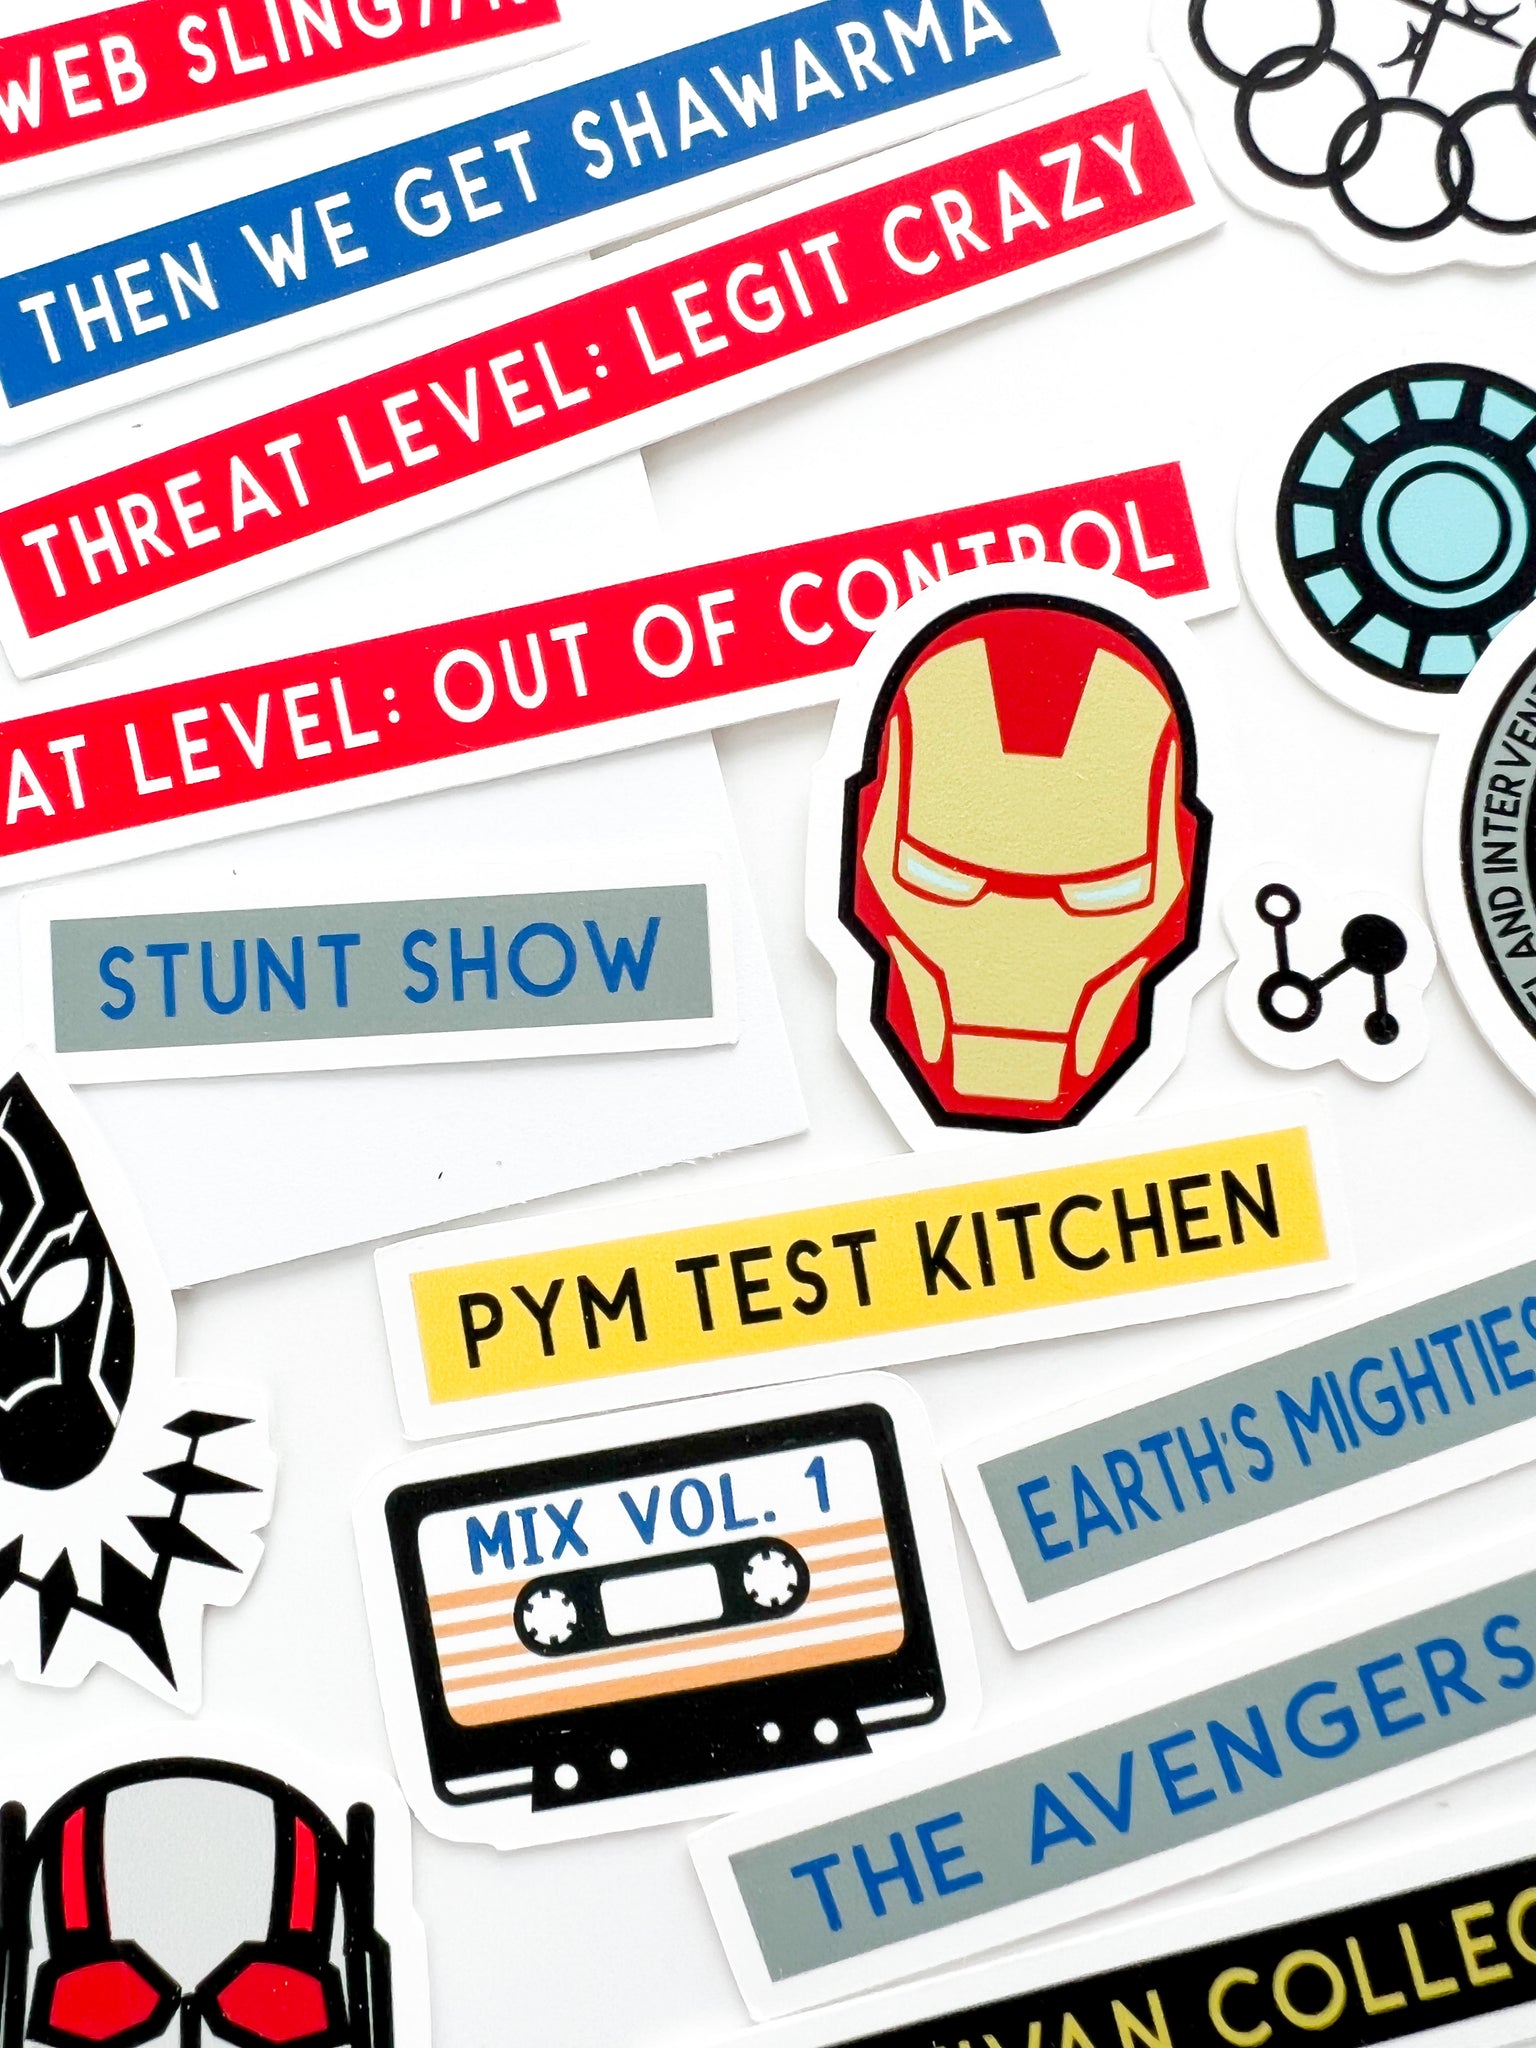 Super heroes, Marvel, Avengers, Avengers campus, Infinity gauntlet, baby groot, Loki, Incredible Hulk, Thor, Antman, Black Widow, Thor's hammer DIY, Guardians of the Galaxy, Mix Tape, Captain America,  Black Panther, California Adventure's Avenger's Campus, Disney Scrapbooking, DIY, Paper crafting, Easy Projects for kids, summer projects for kids, easy summer projects, Dr. Strange